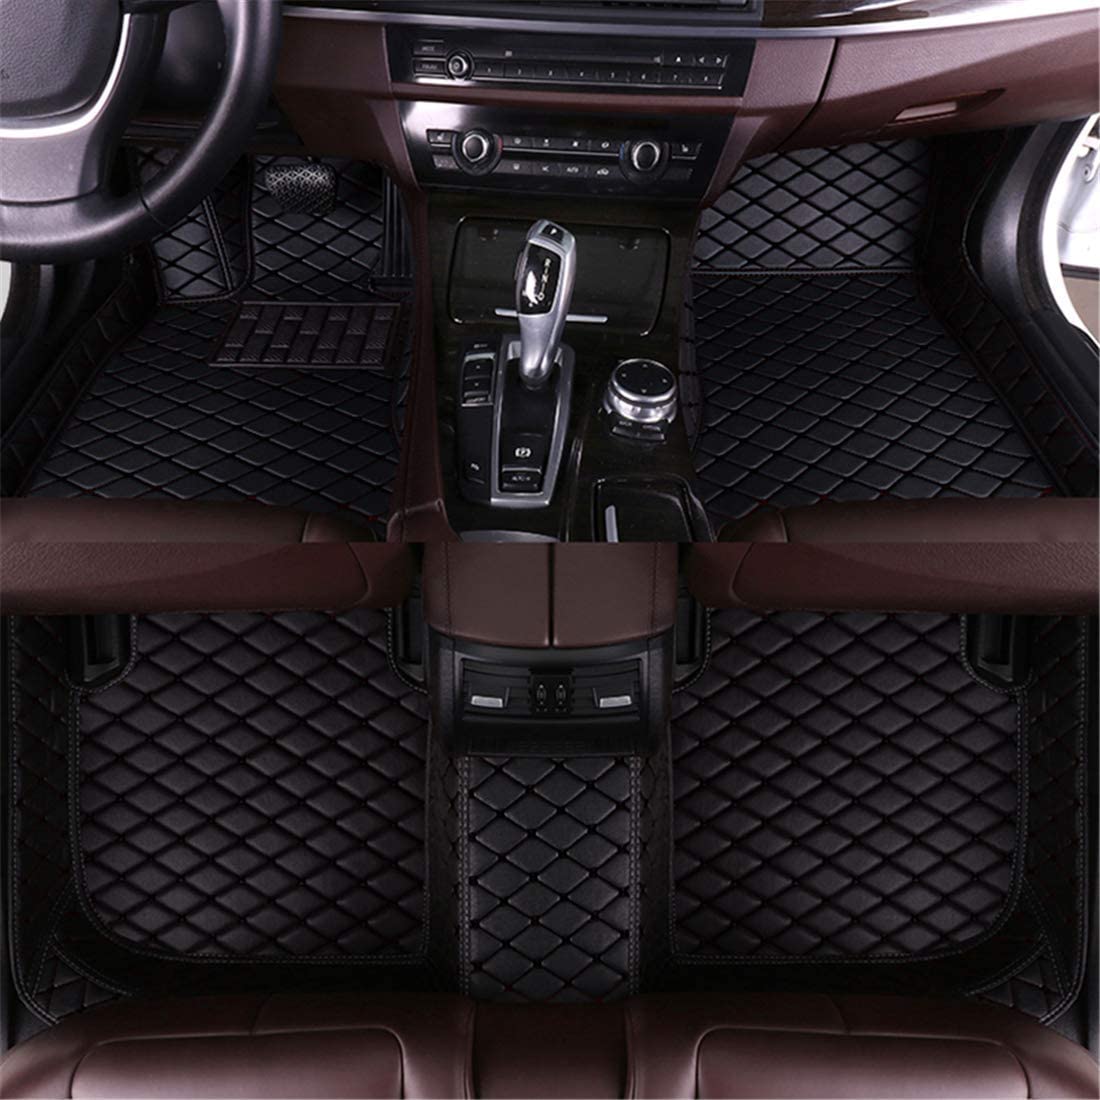 Car Floor Mats fit for Jaguar X-Type 2002-2007 Full Coverage All Weather Protection Non-Slip Leather Floor Liners